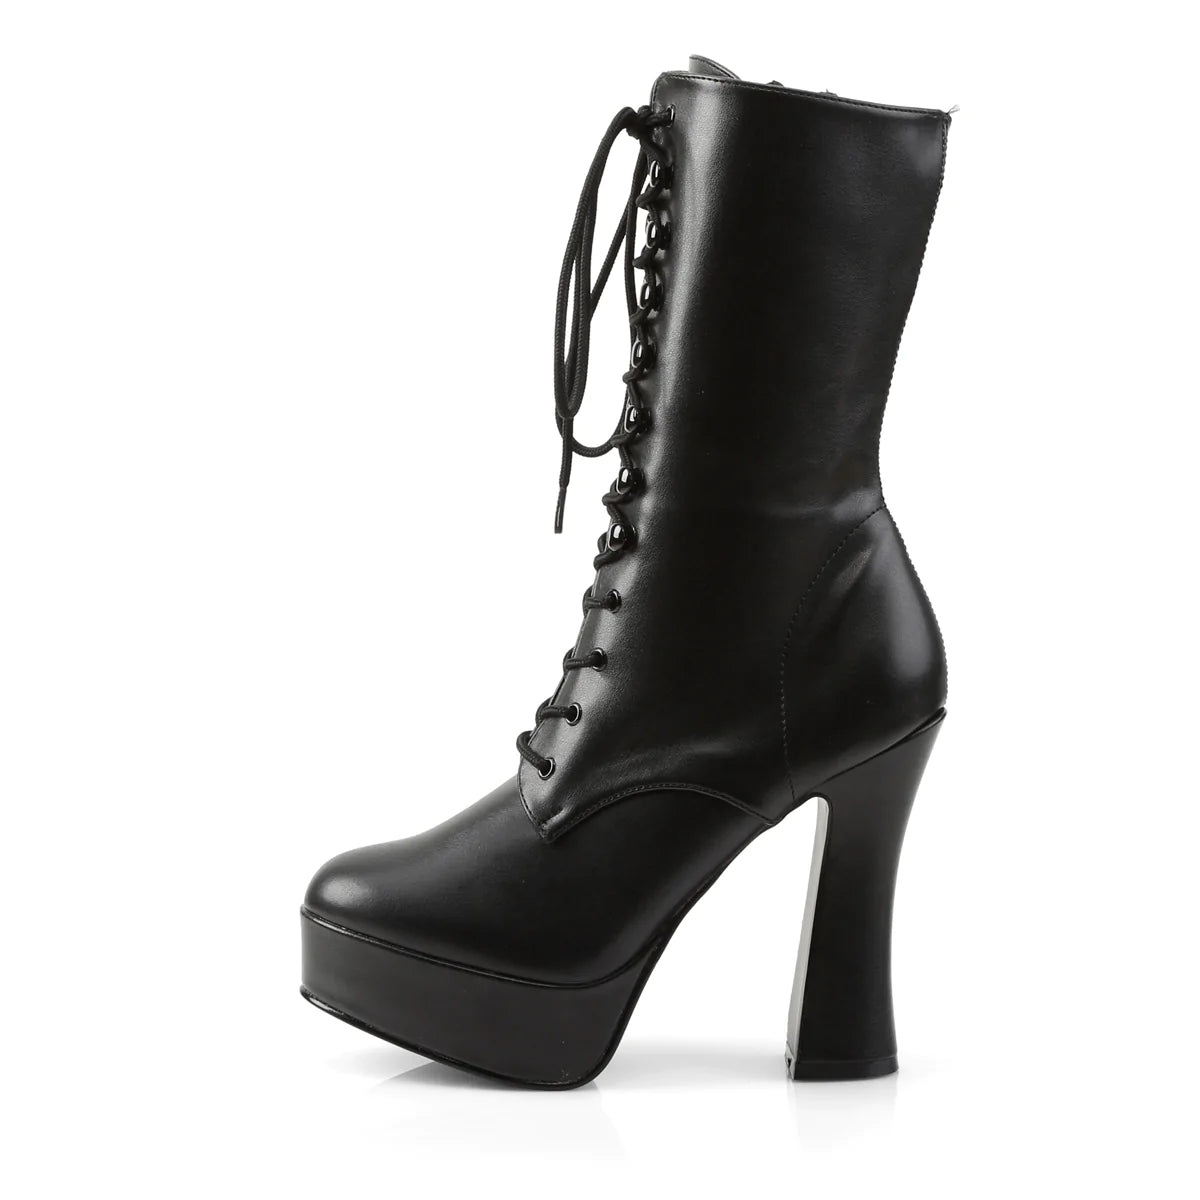 The left side of the black, vegan leather Electra Ankle Boot.